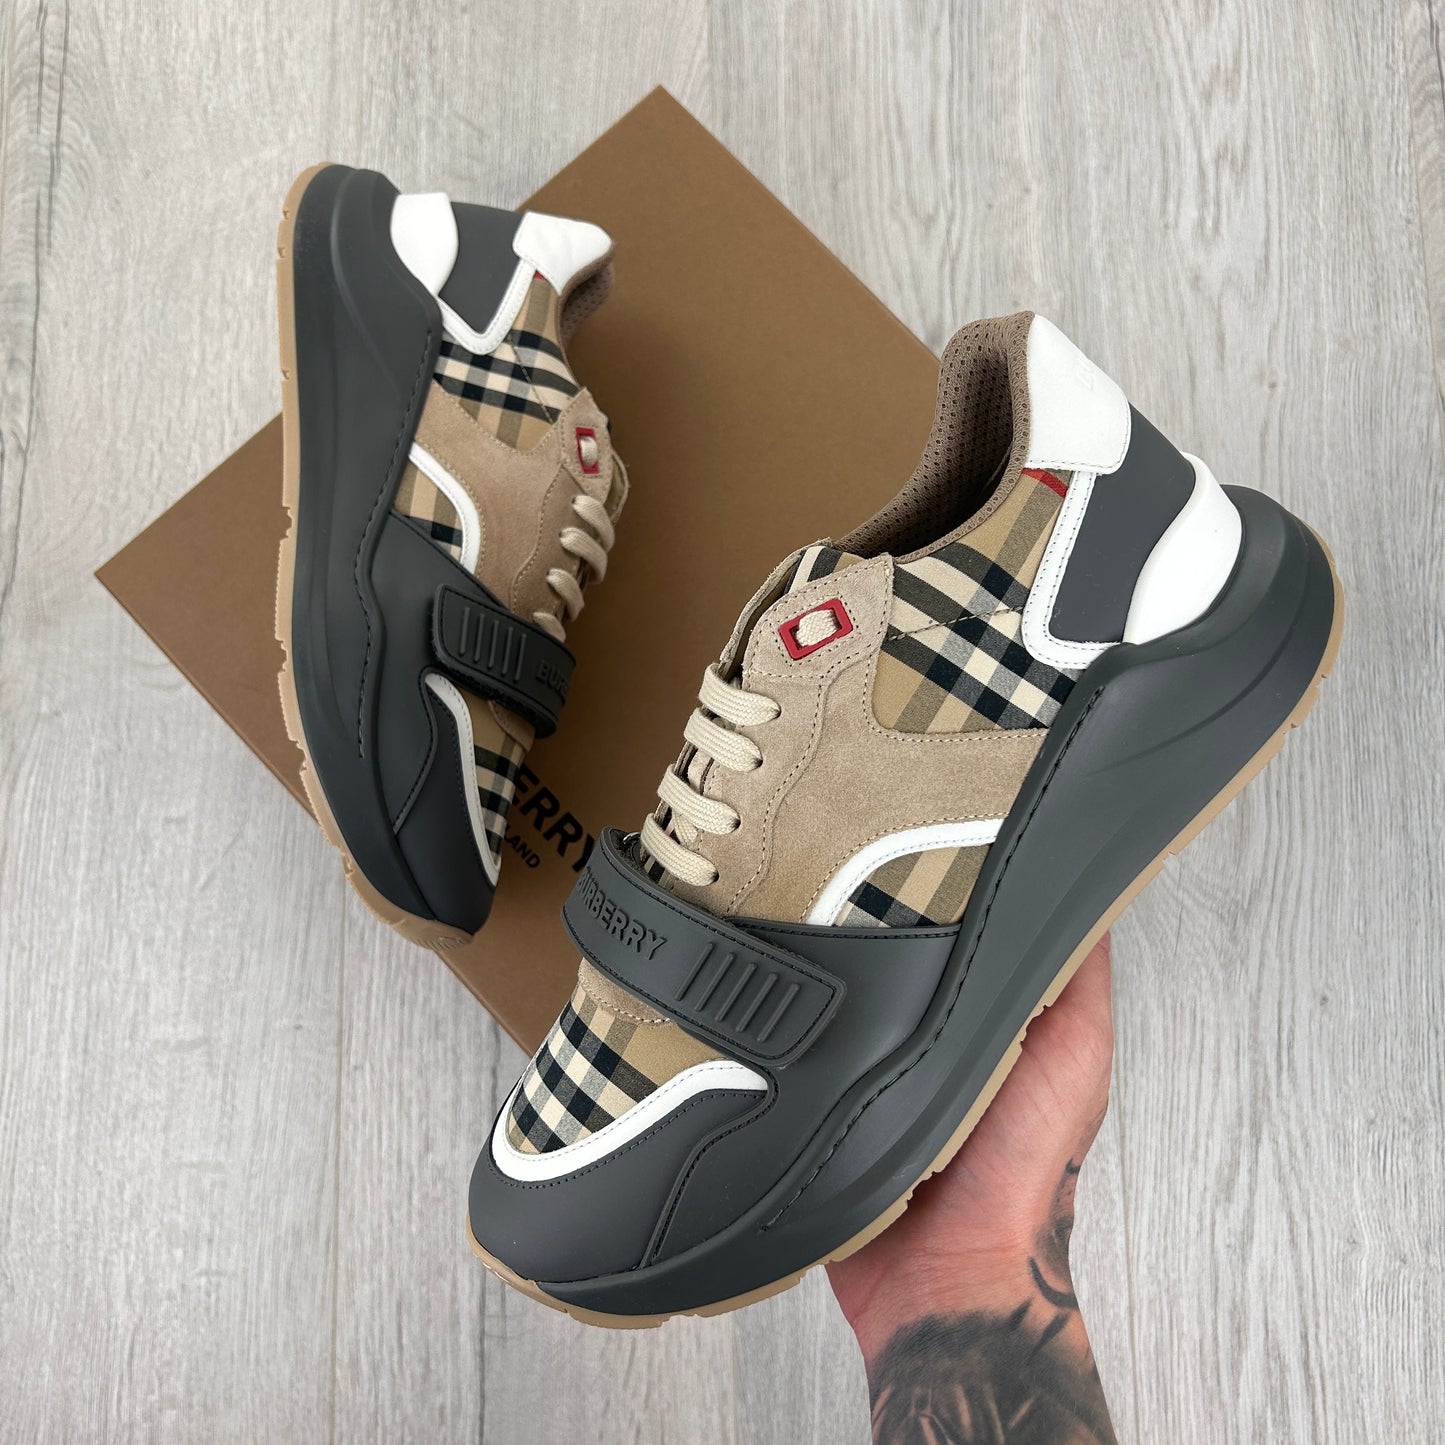 Burberry Men’s Vintage Check, Suede Leather Trainers - UK 10